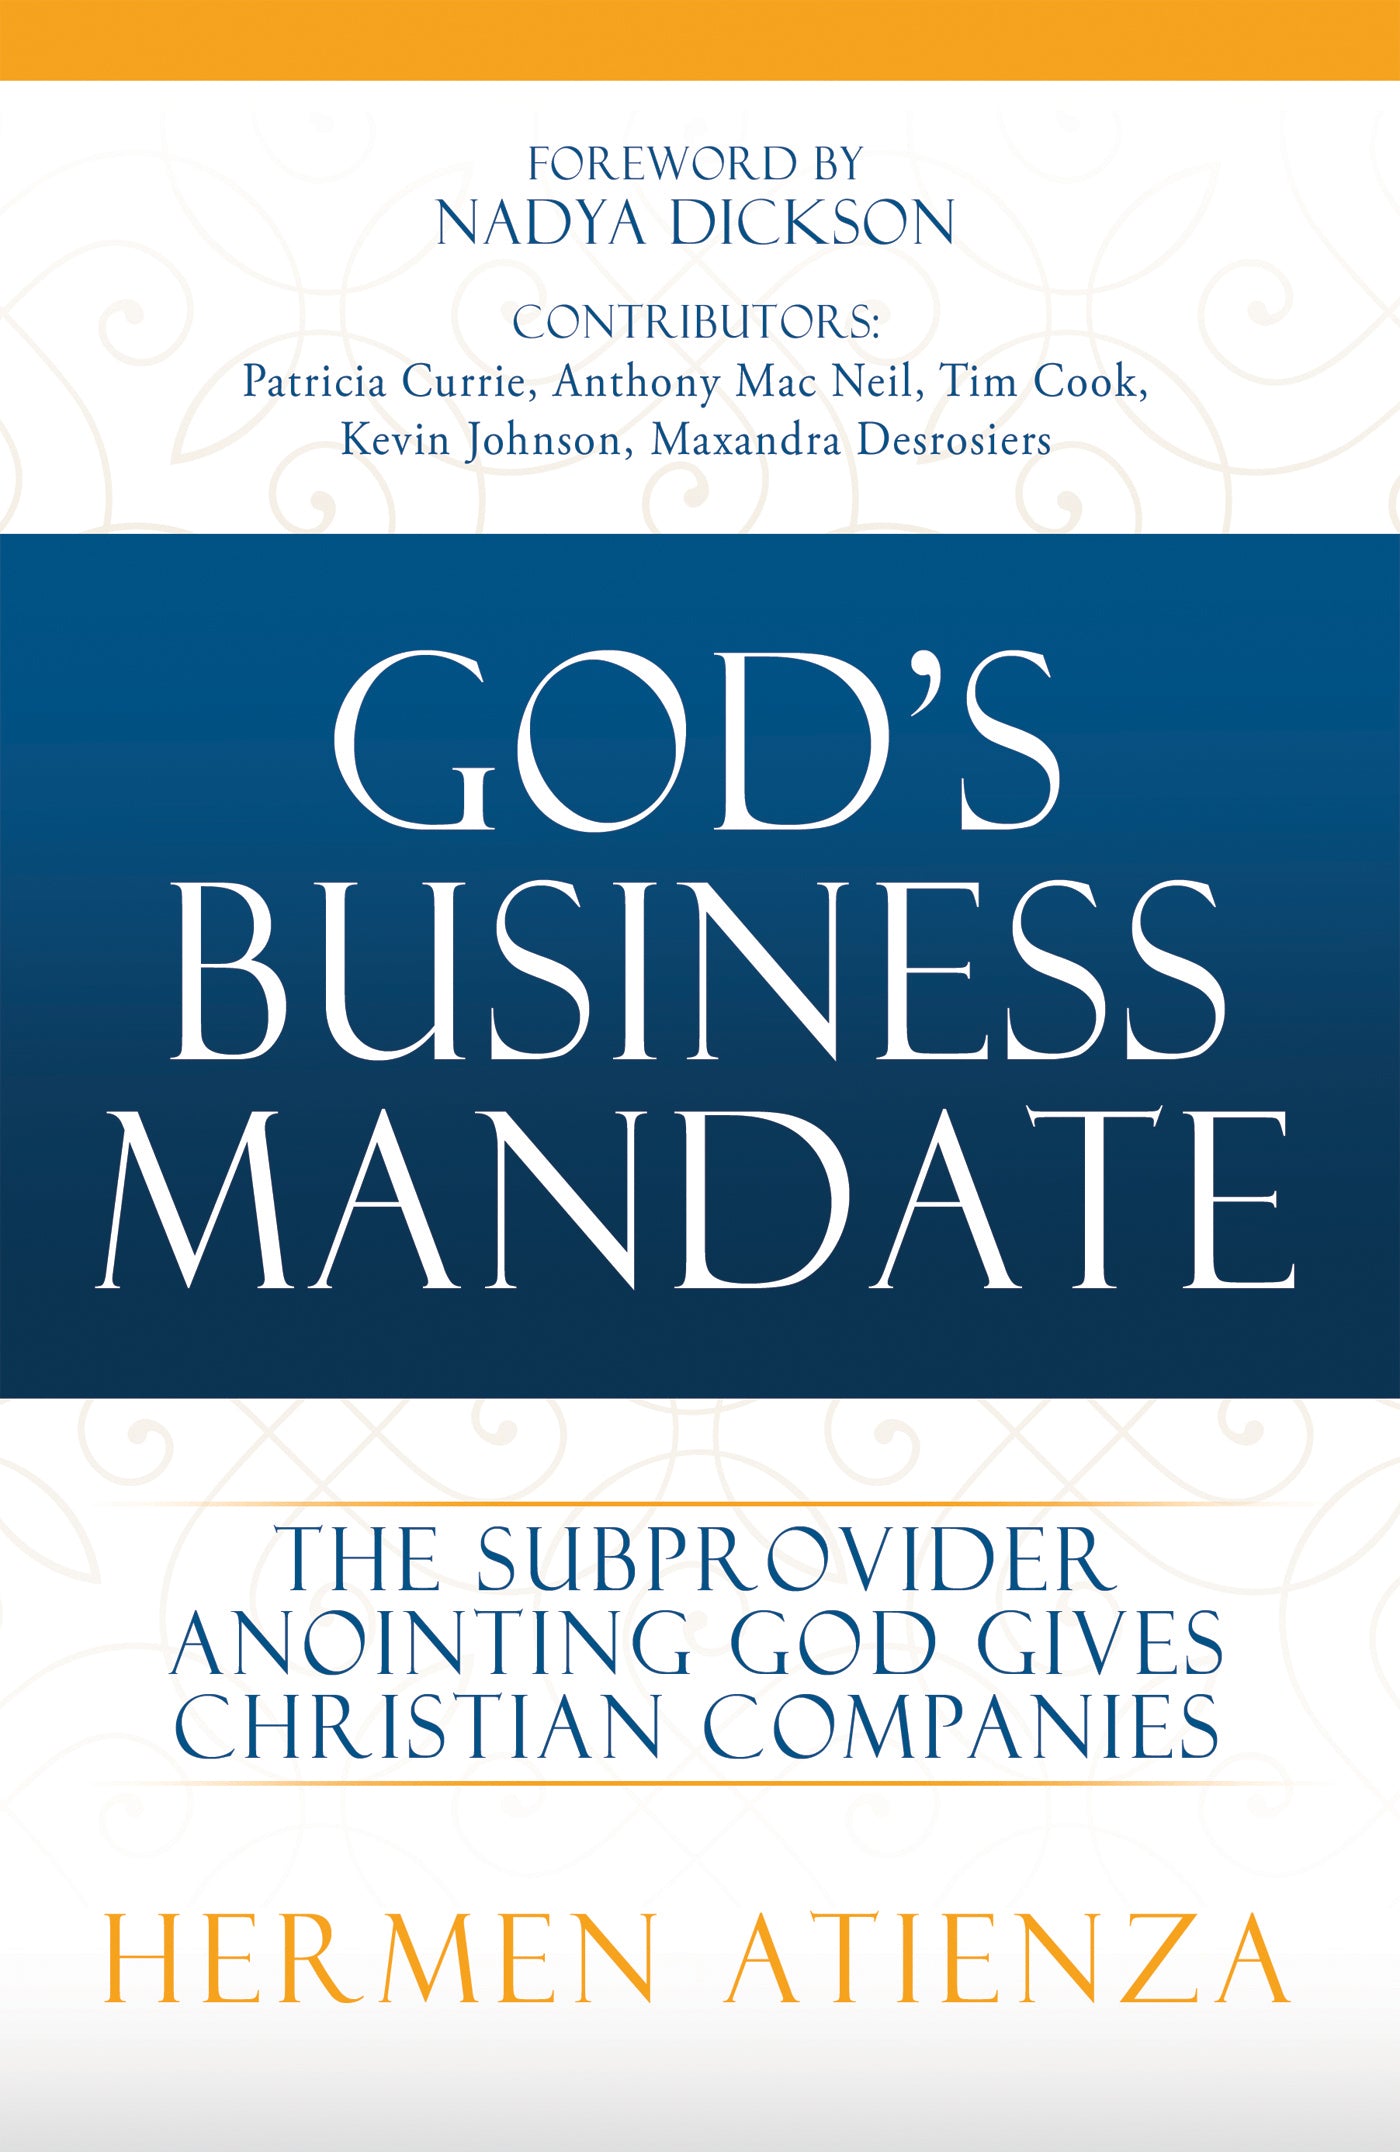 God's Business Mandate: The Subprovider Anointing God Gives Gives Christian Companies